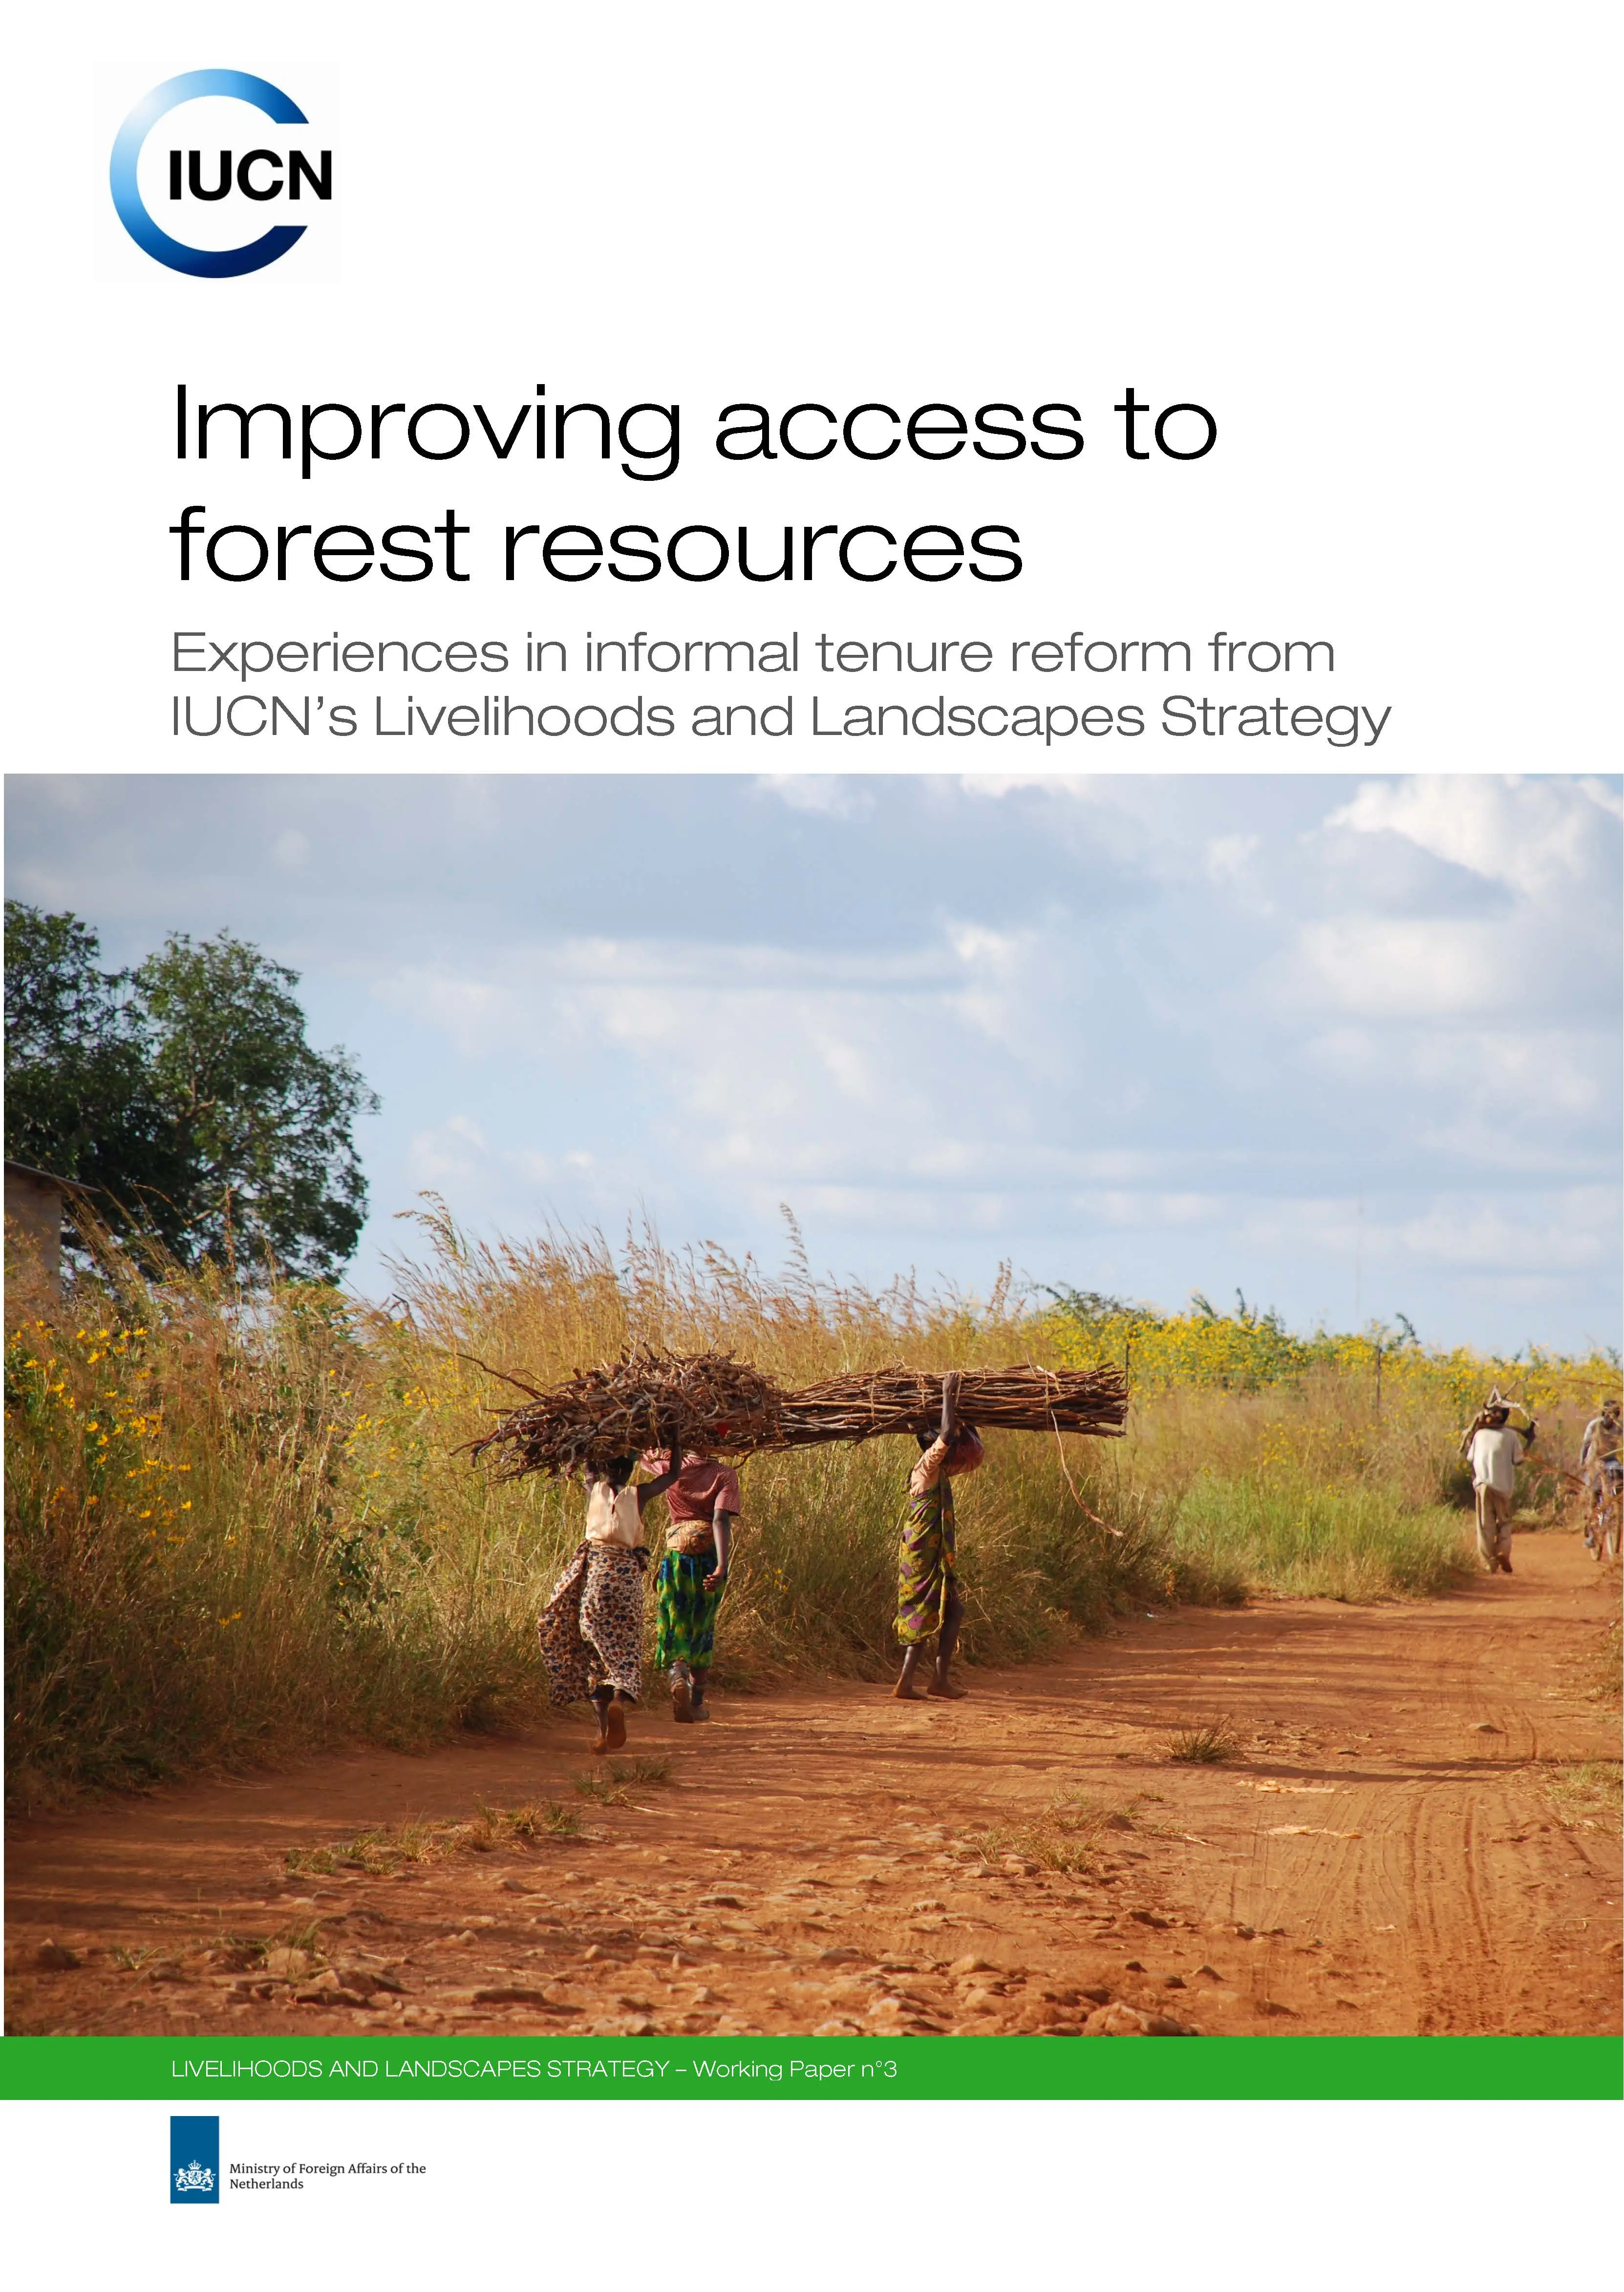 Experiences in informal tenure reform from IUCN's Livelihoods & Landscapes Strategy